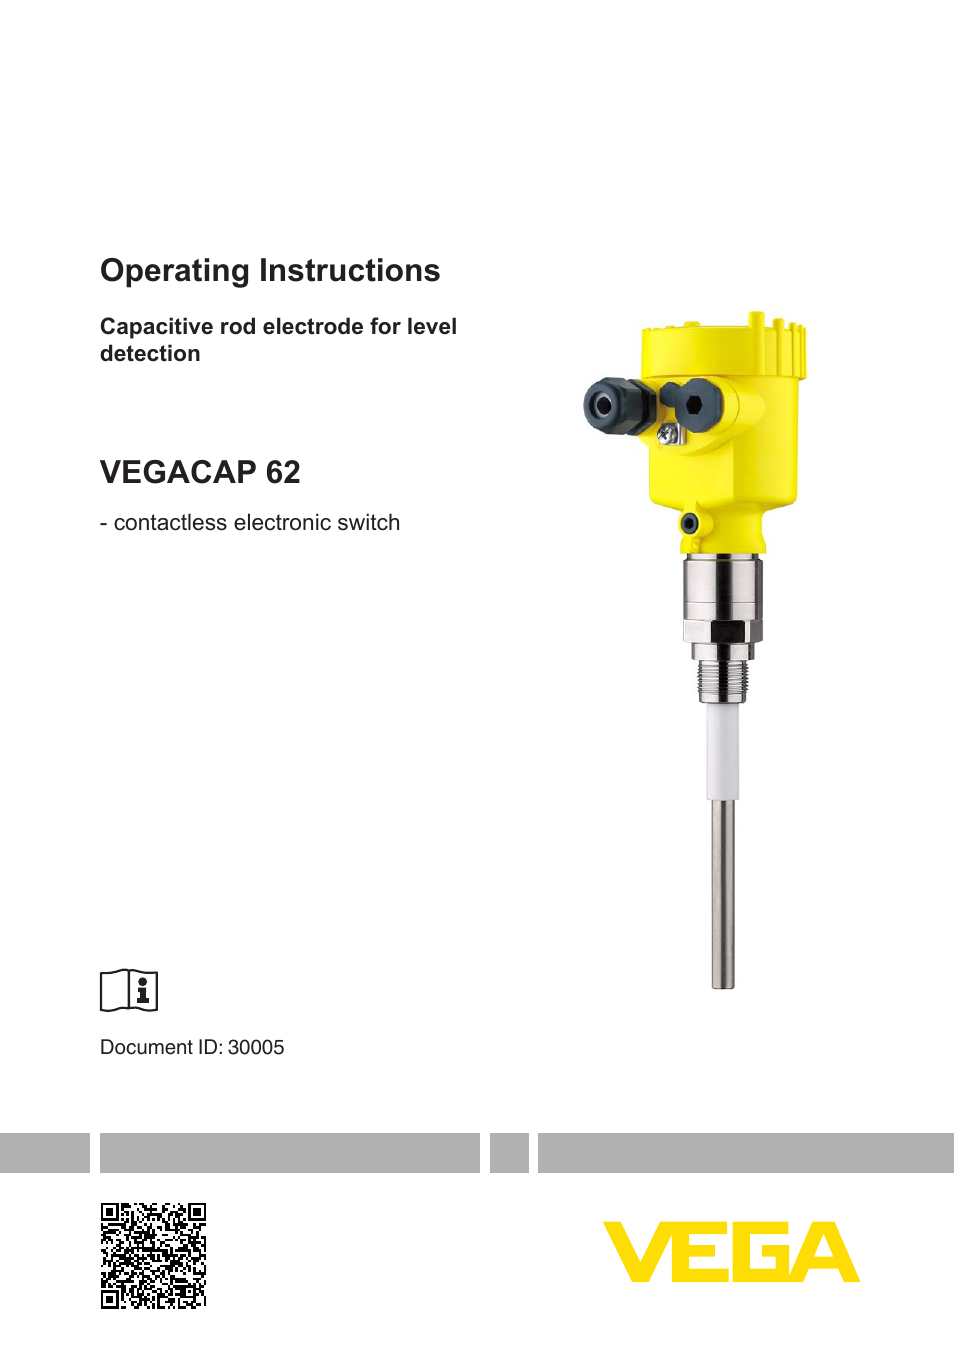 VEGACAP 62 - contactless electronic switch